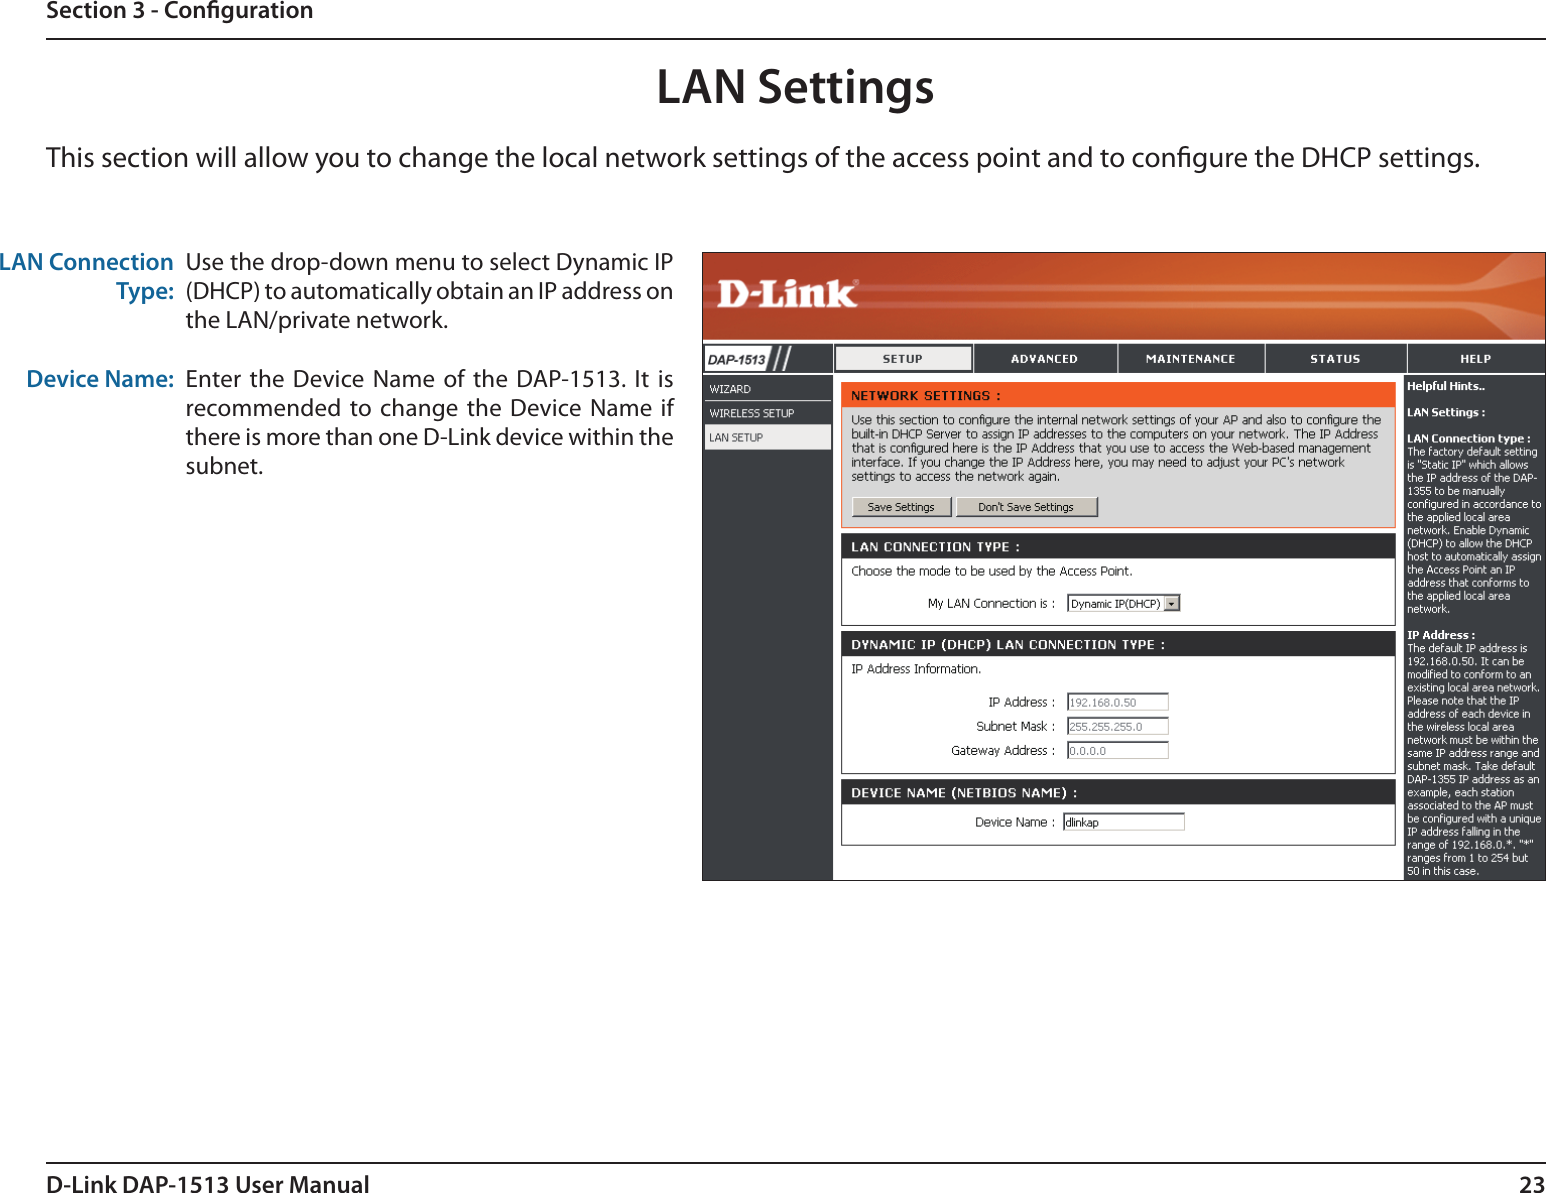 23D-Link DAP-1513 User ManualSection 3 - CongurationLAN SettingsThis section will allow you to change the local network settings of the access point and to congure the DHCP settings.LAN Connection Type:Device Name:Use the drop-down menu to select Dynamic IP (DHCP) to automatically obtain an IP address on the LAN/private network.Enter the Device Name  of the DAP-1513. It is recommended to change  the Device Name  if there is more than one D-Link device within the subnet.